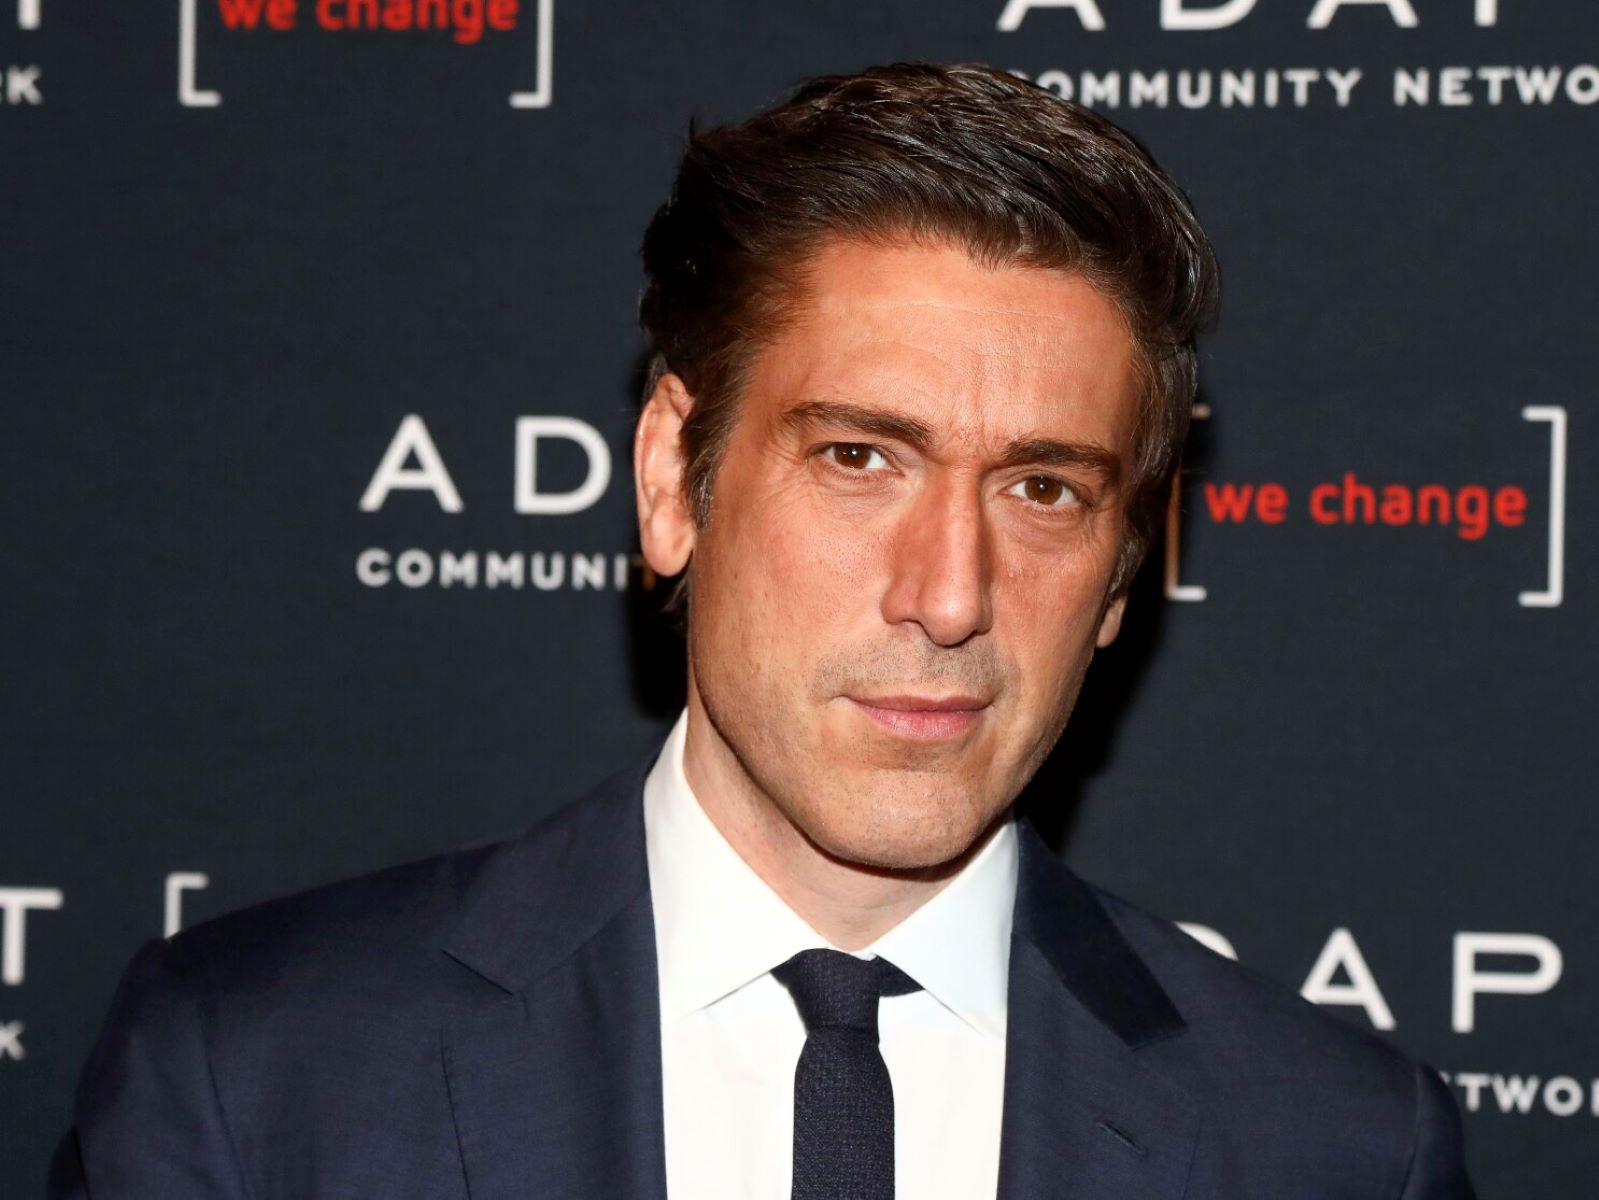 The Surprising Truth About ABC News Anchor David Muir's Marriage